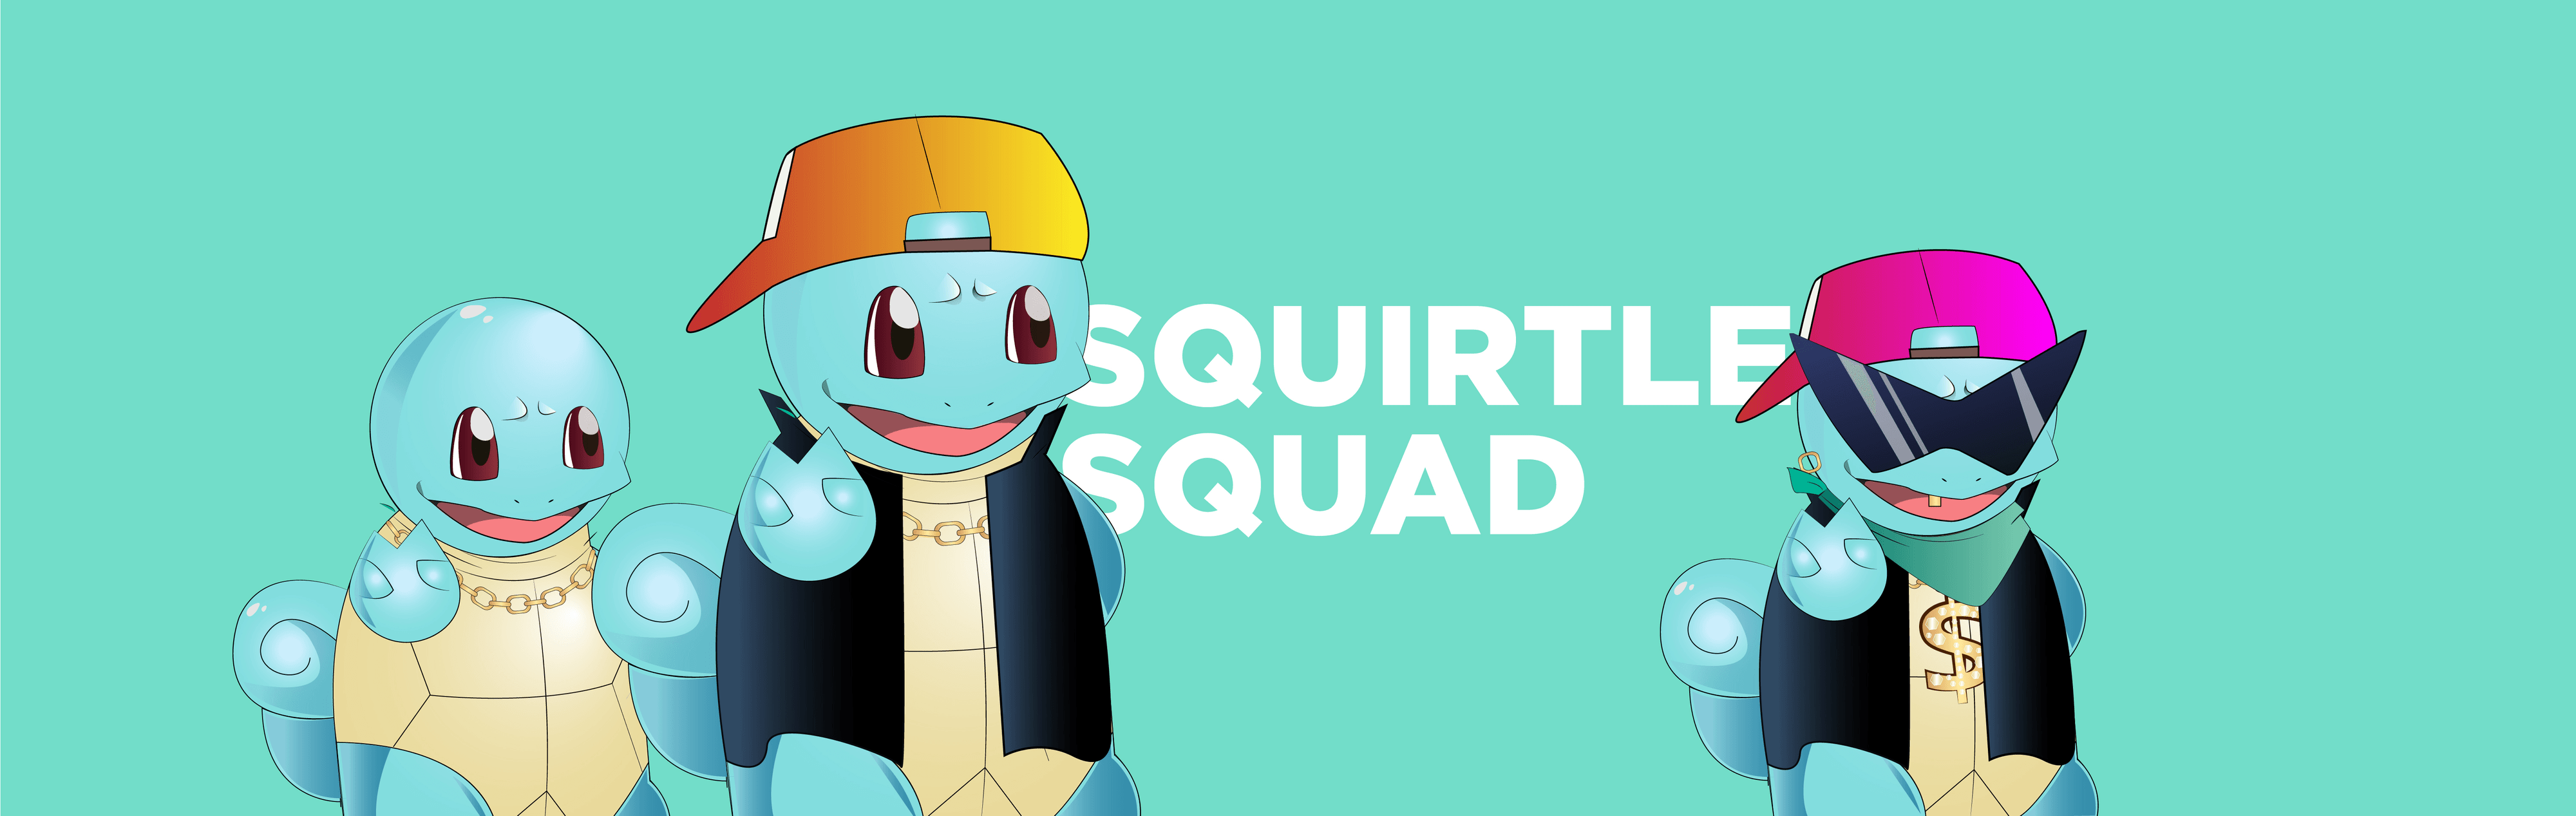 Squirtle_SQUAD_nft 横幅